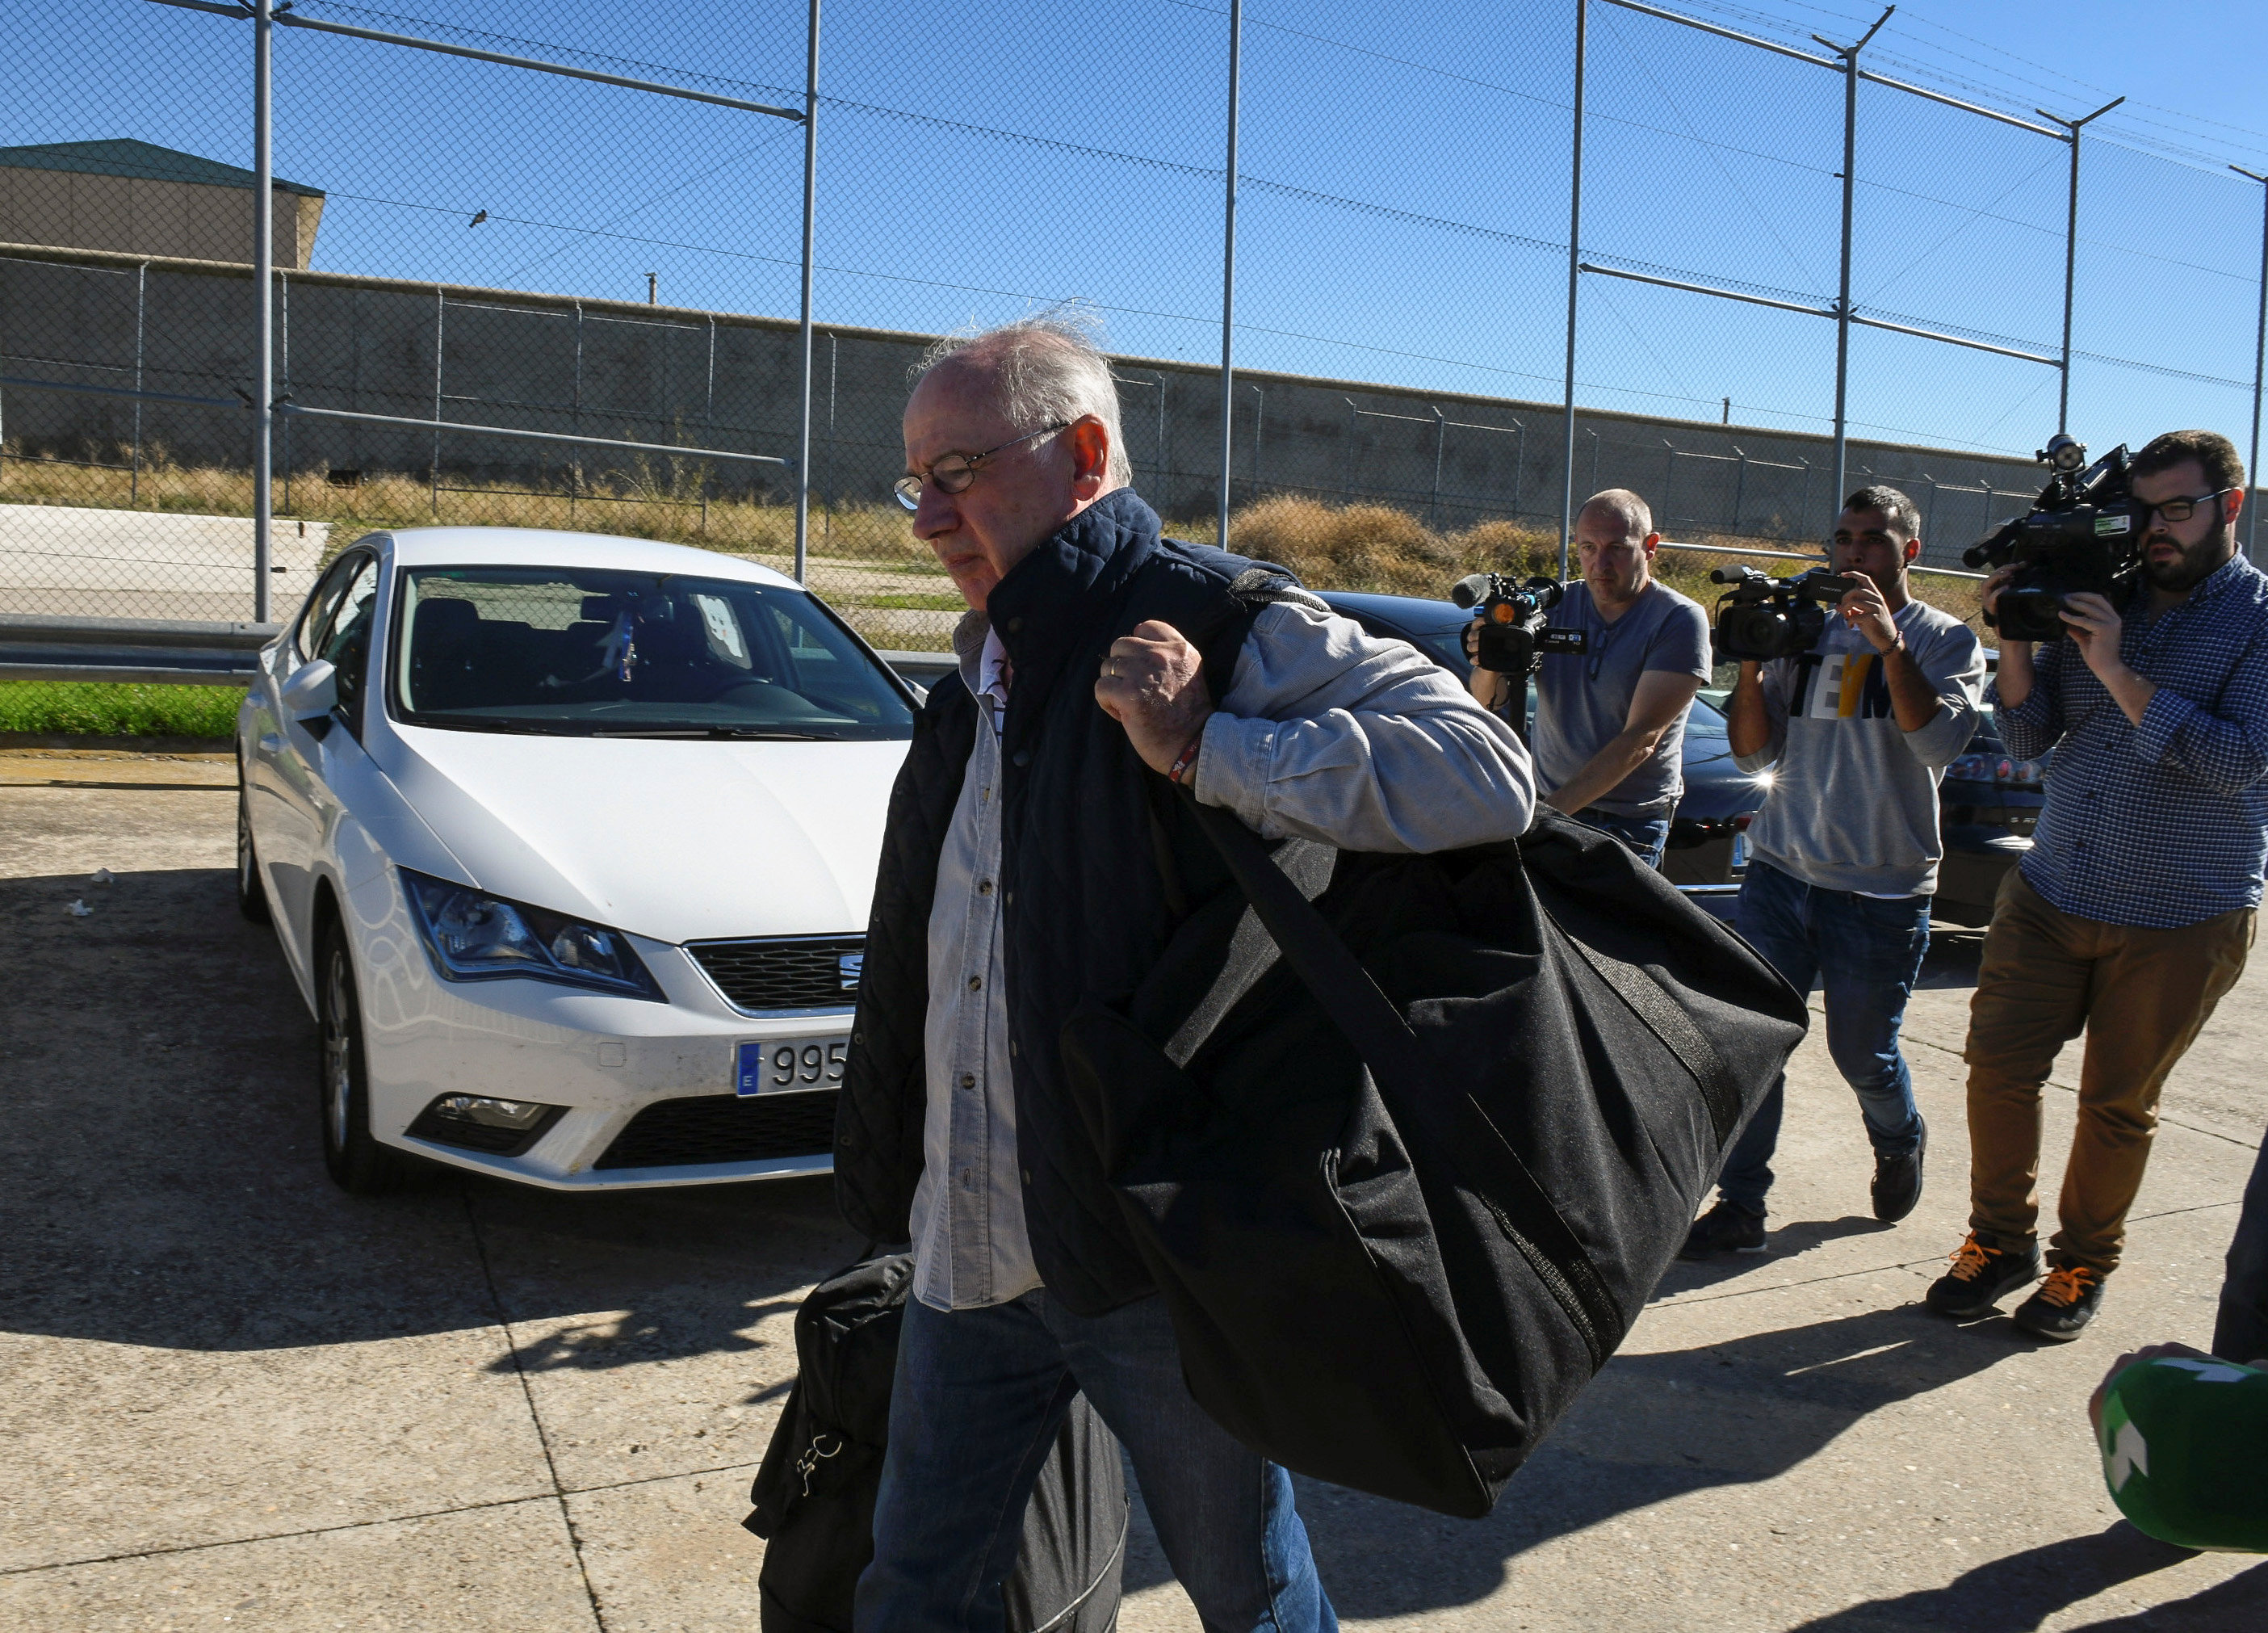 The former Spanish vice president, Rodrigo Rato, on his way to enter prison on October 25, 2018 (by Reuters)